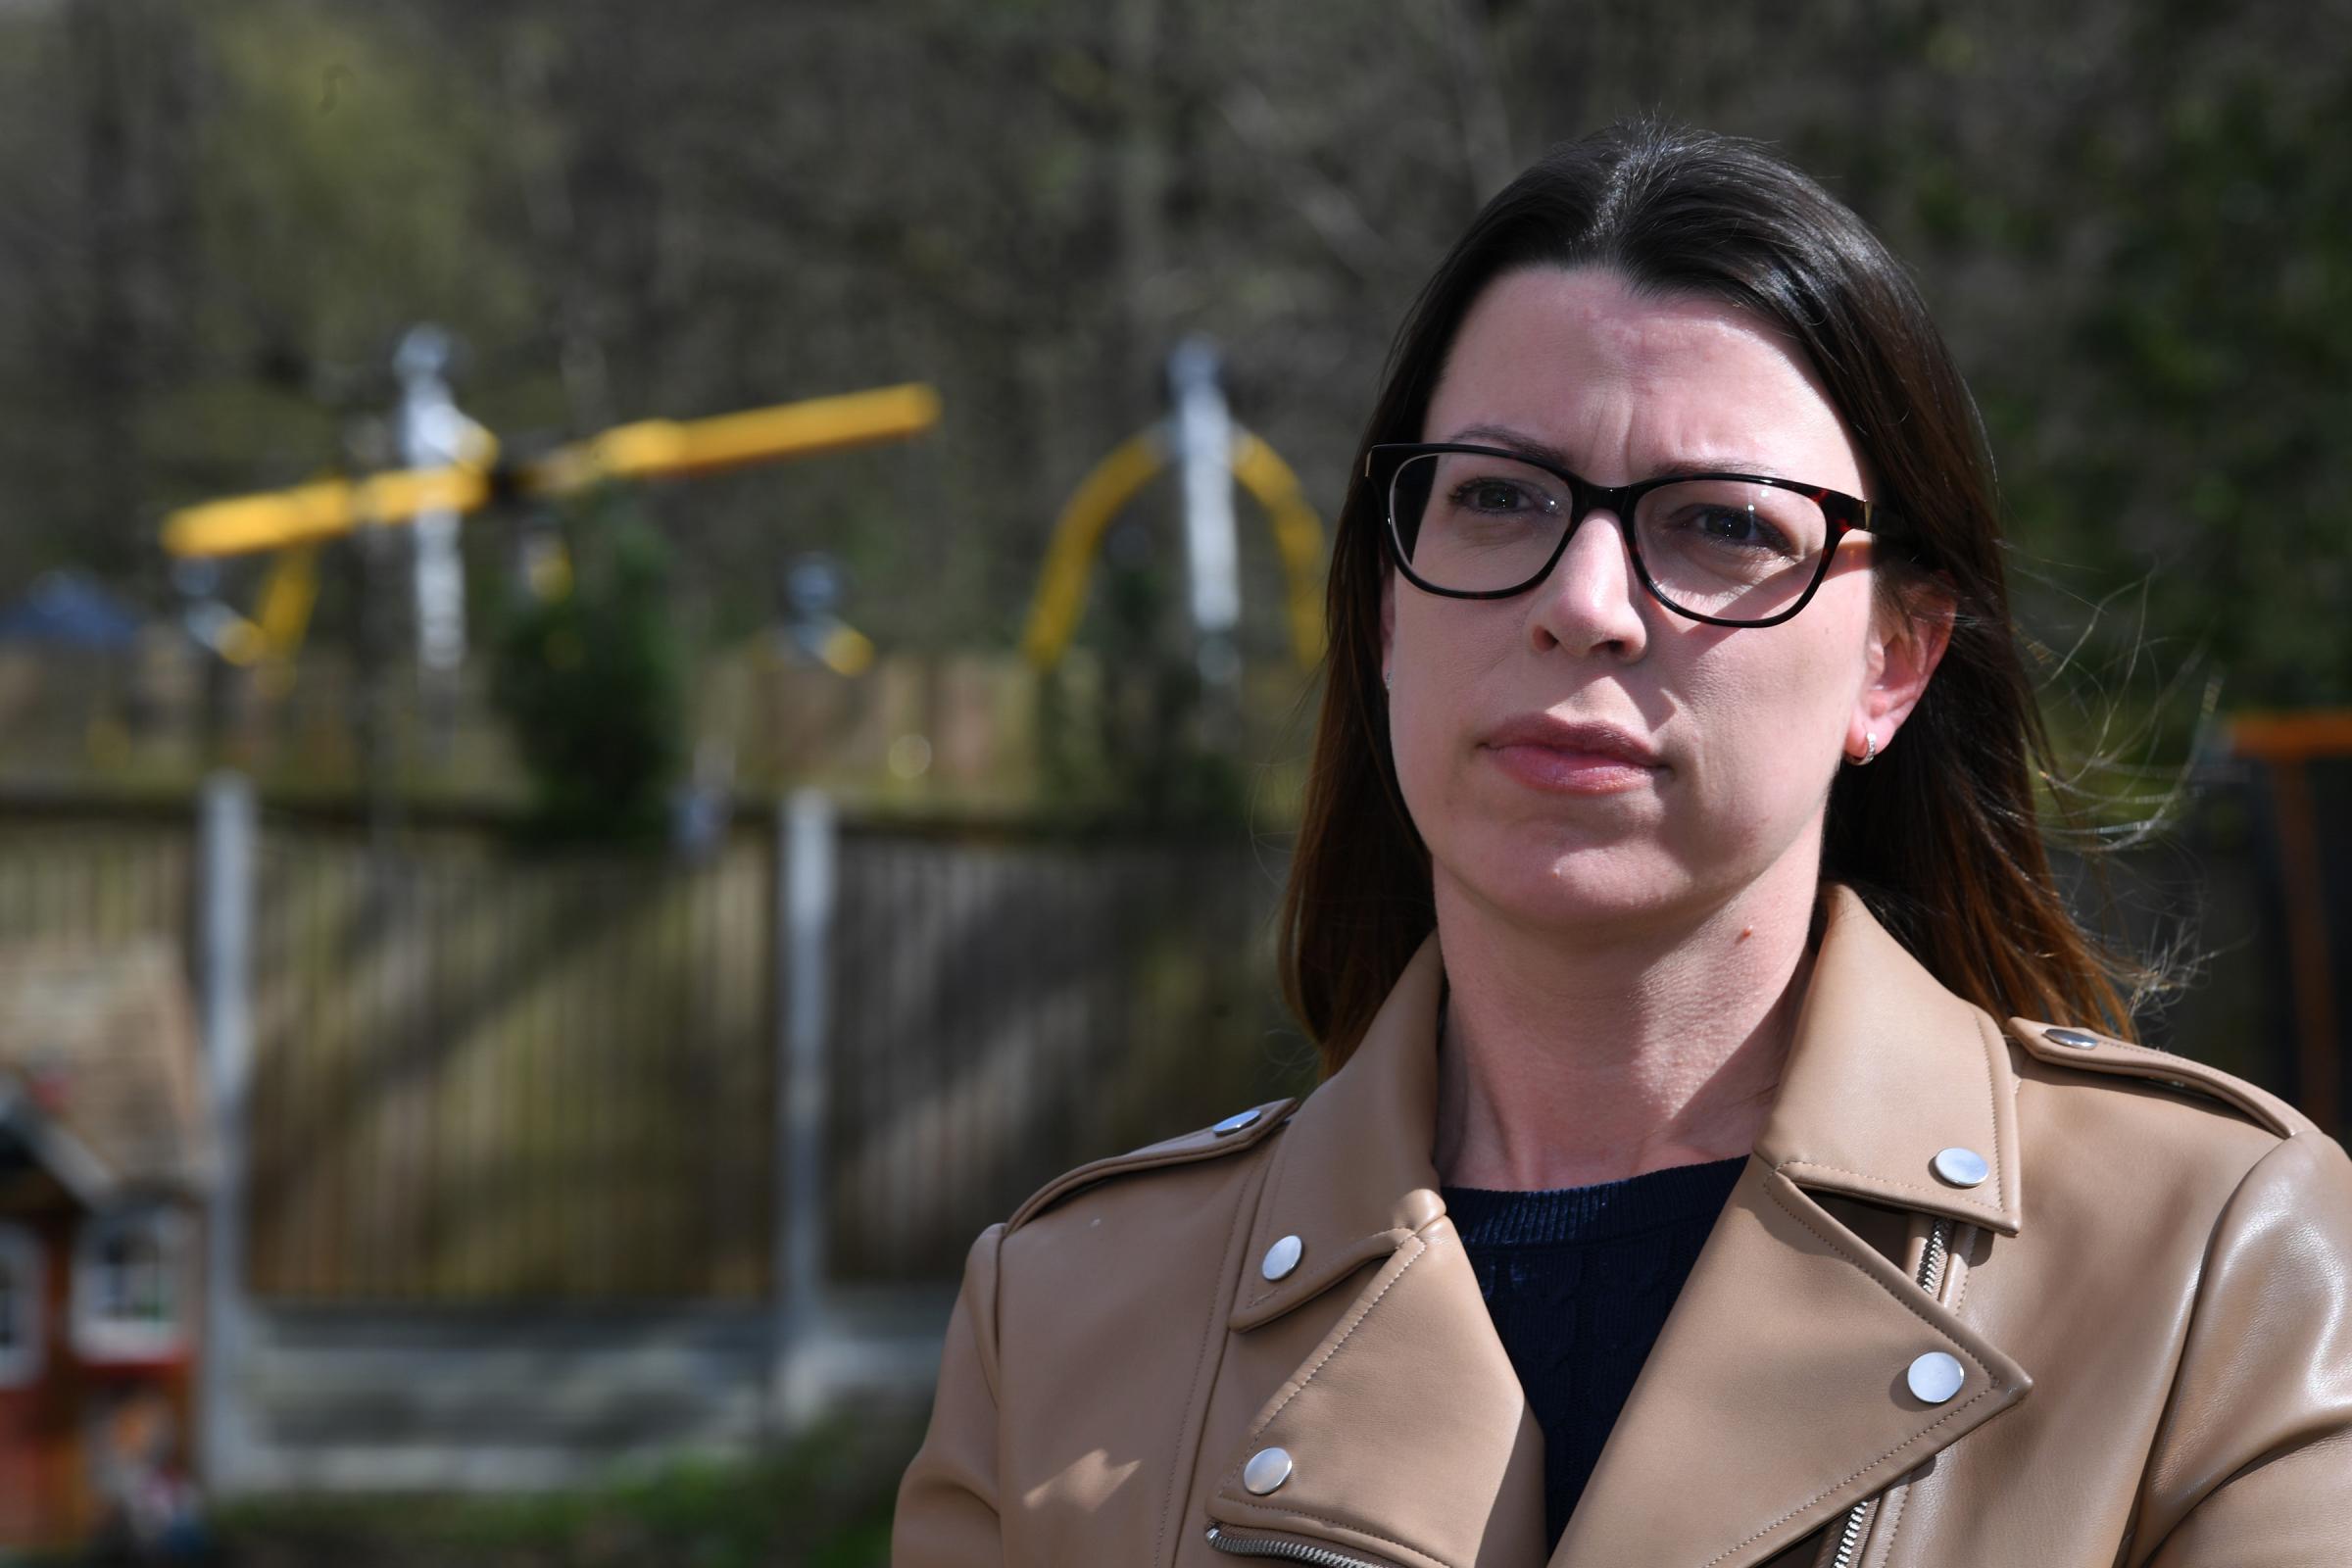 Leah Flack and her family are annoyed about anti-social behaviour fromadults drinking and swearing in a play area behind their back garden in Hartswood Road, Brentwood..